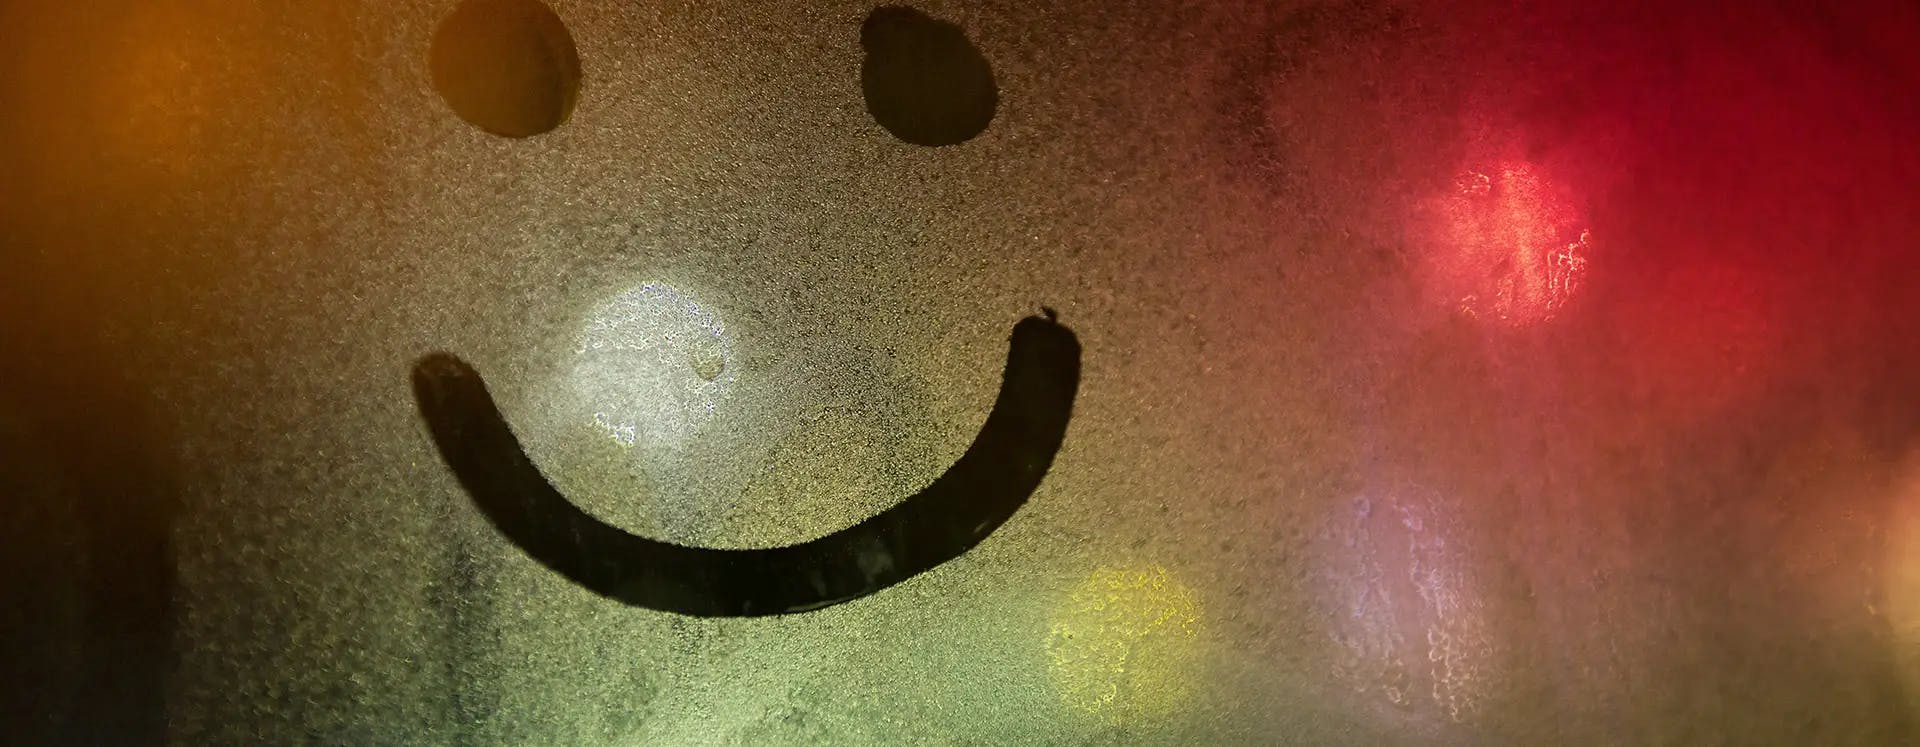 Smiley face drawn on a condensed window